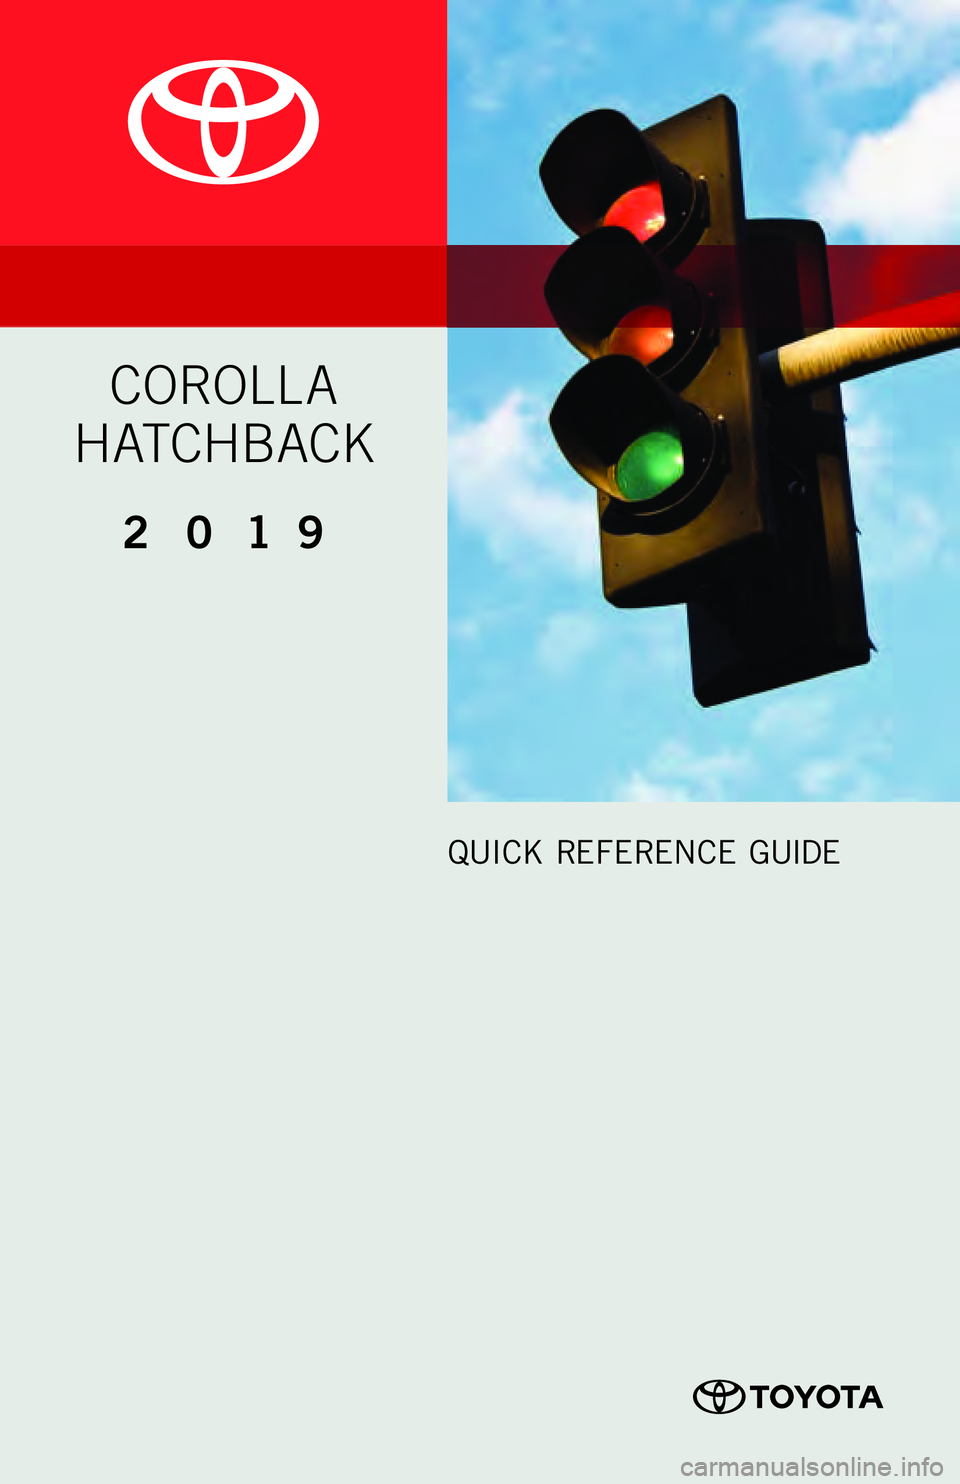 TOYOTA COROLLA HATCHBACK 2019  Owners Manual (in English) 00505QRG19CORHB
2 0 1 9 
QUICK REFERENCE  GUIDE
COROLL A 
HATCHBACK
18-MKG-11873_QRG_Cover_COROLLA_HATCHBACK_1_1F_lm.indd  1595/17/18  11:39 PM 